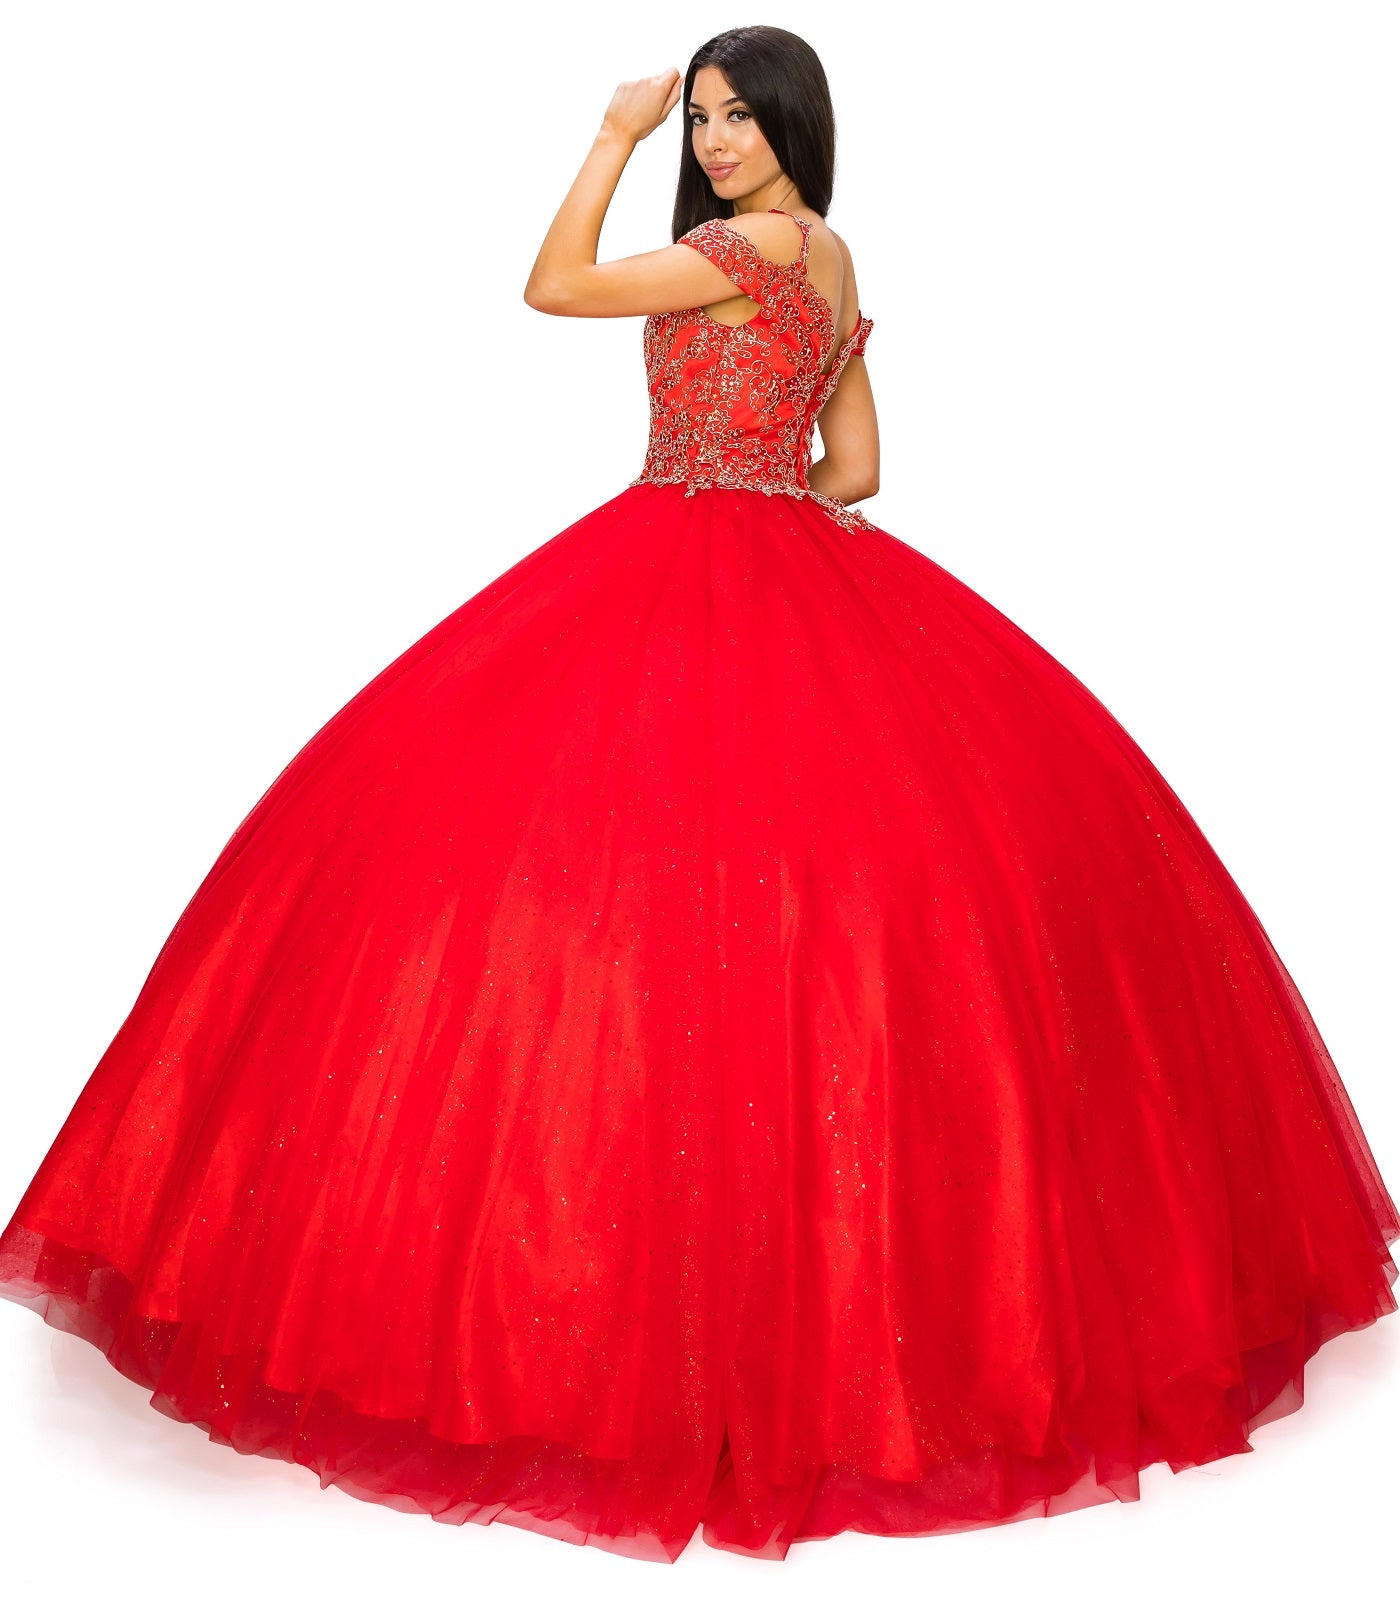 Off the Shoulder Floral Tulle Lace Quinceanera Dress by Cinderella Couture USA AS8028J